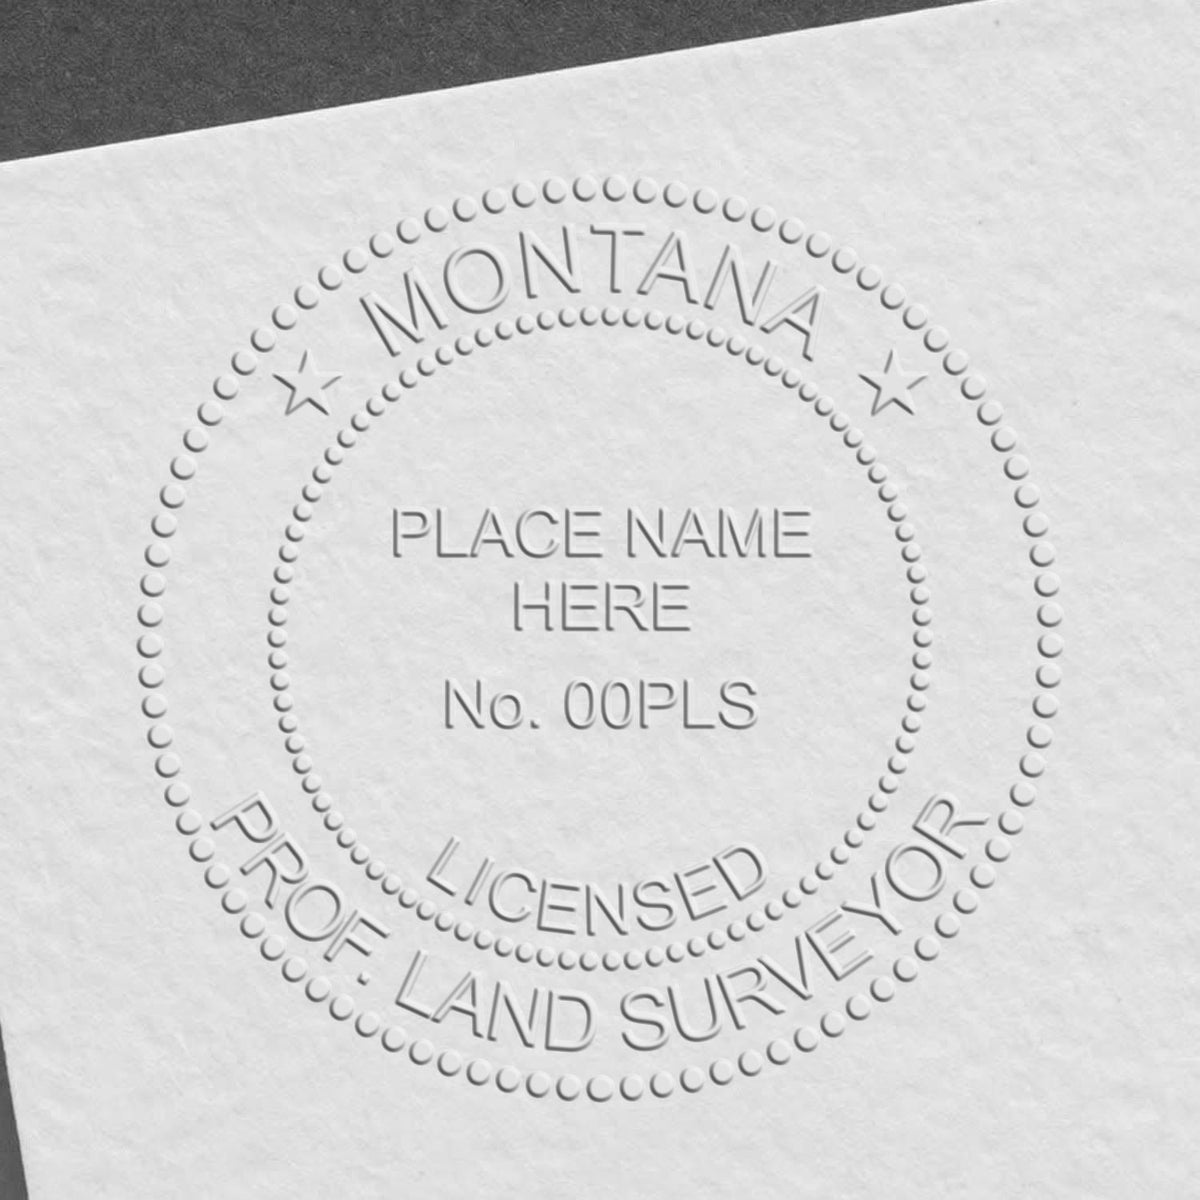 A photograph of the Hybrid Montana Land Surveyor Seal stamp impression reveals a vivid, professional image of the on paper.